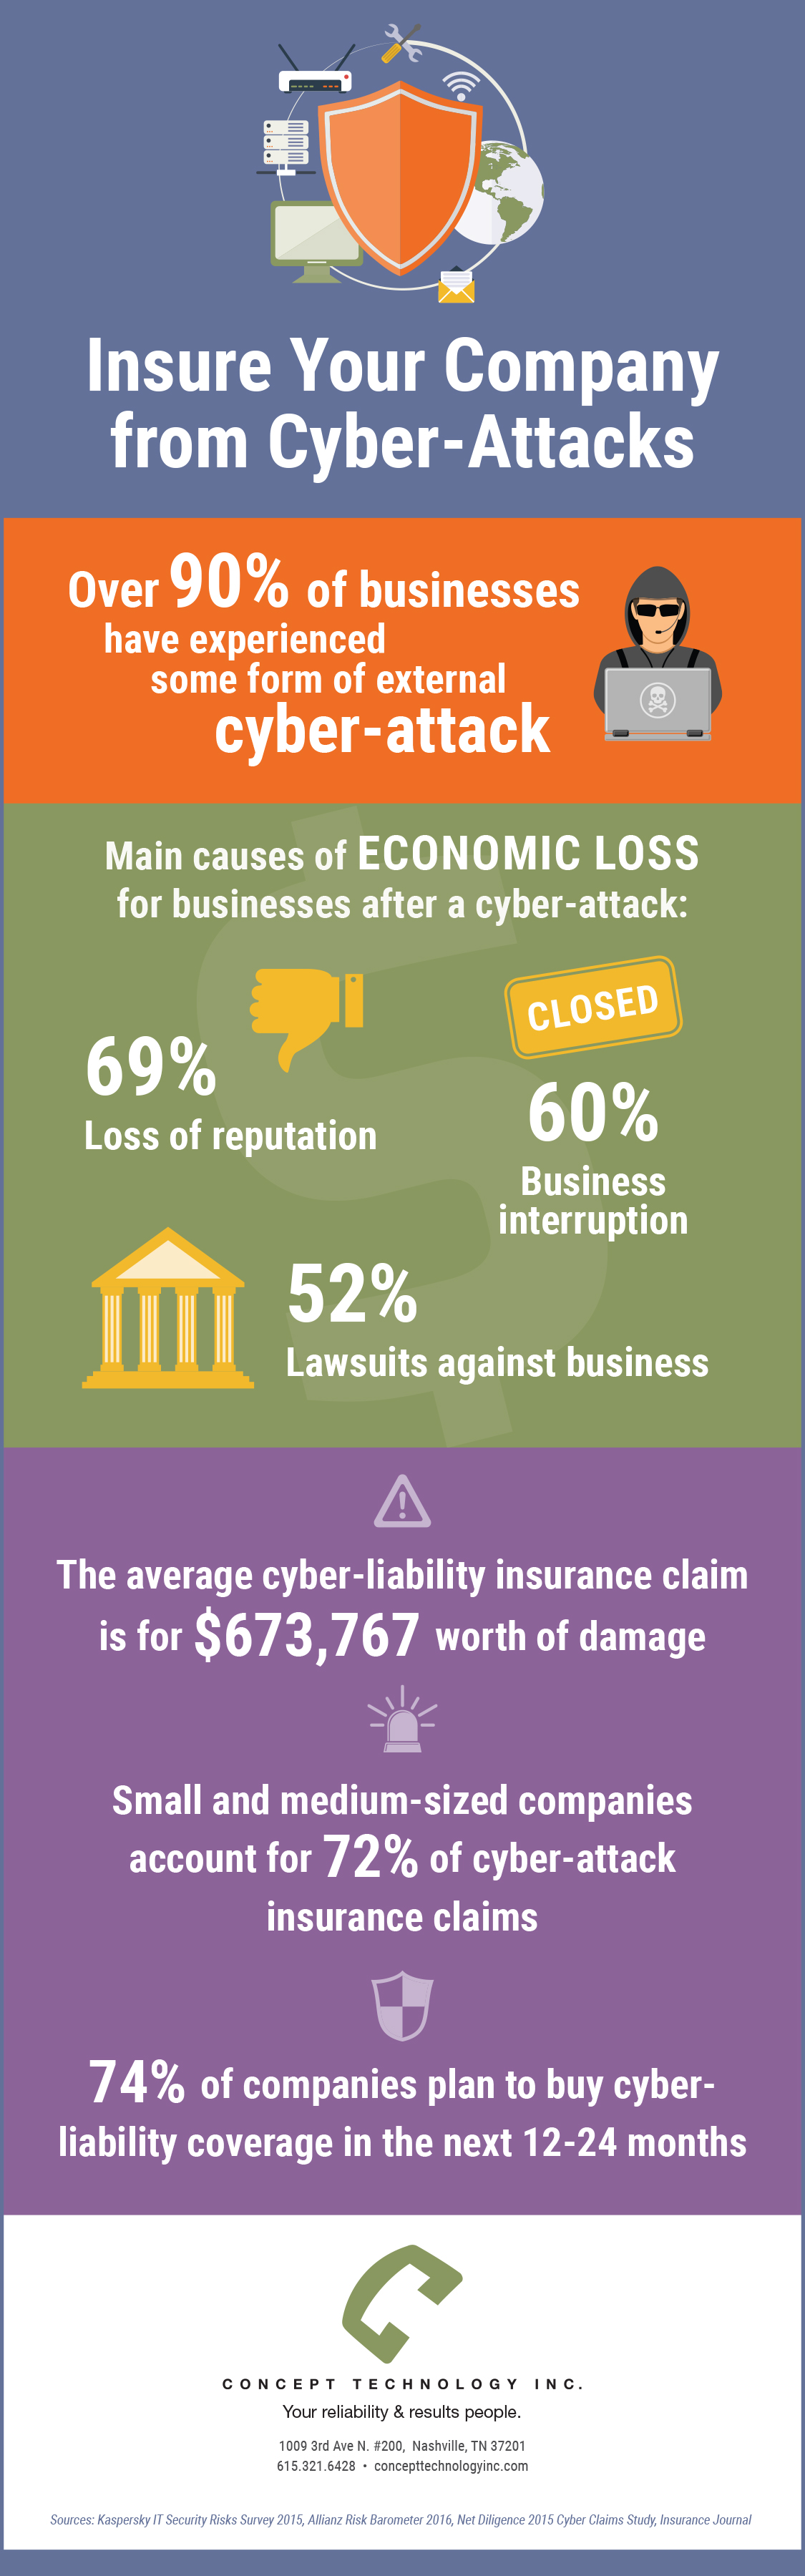 concept technology cyber insurance infographic